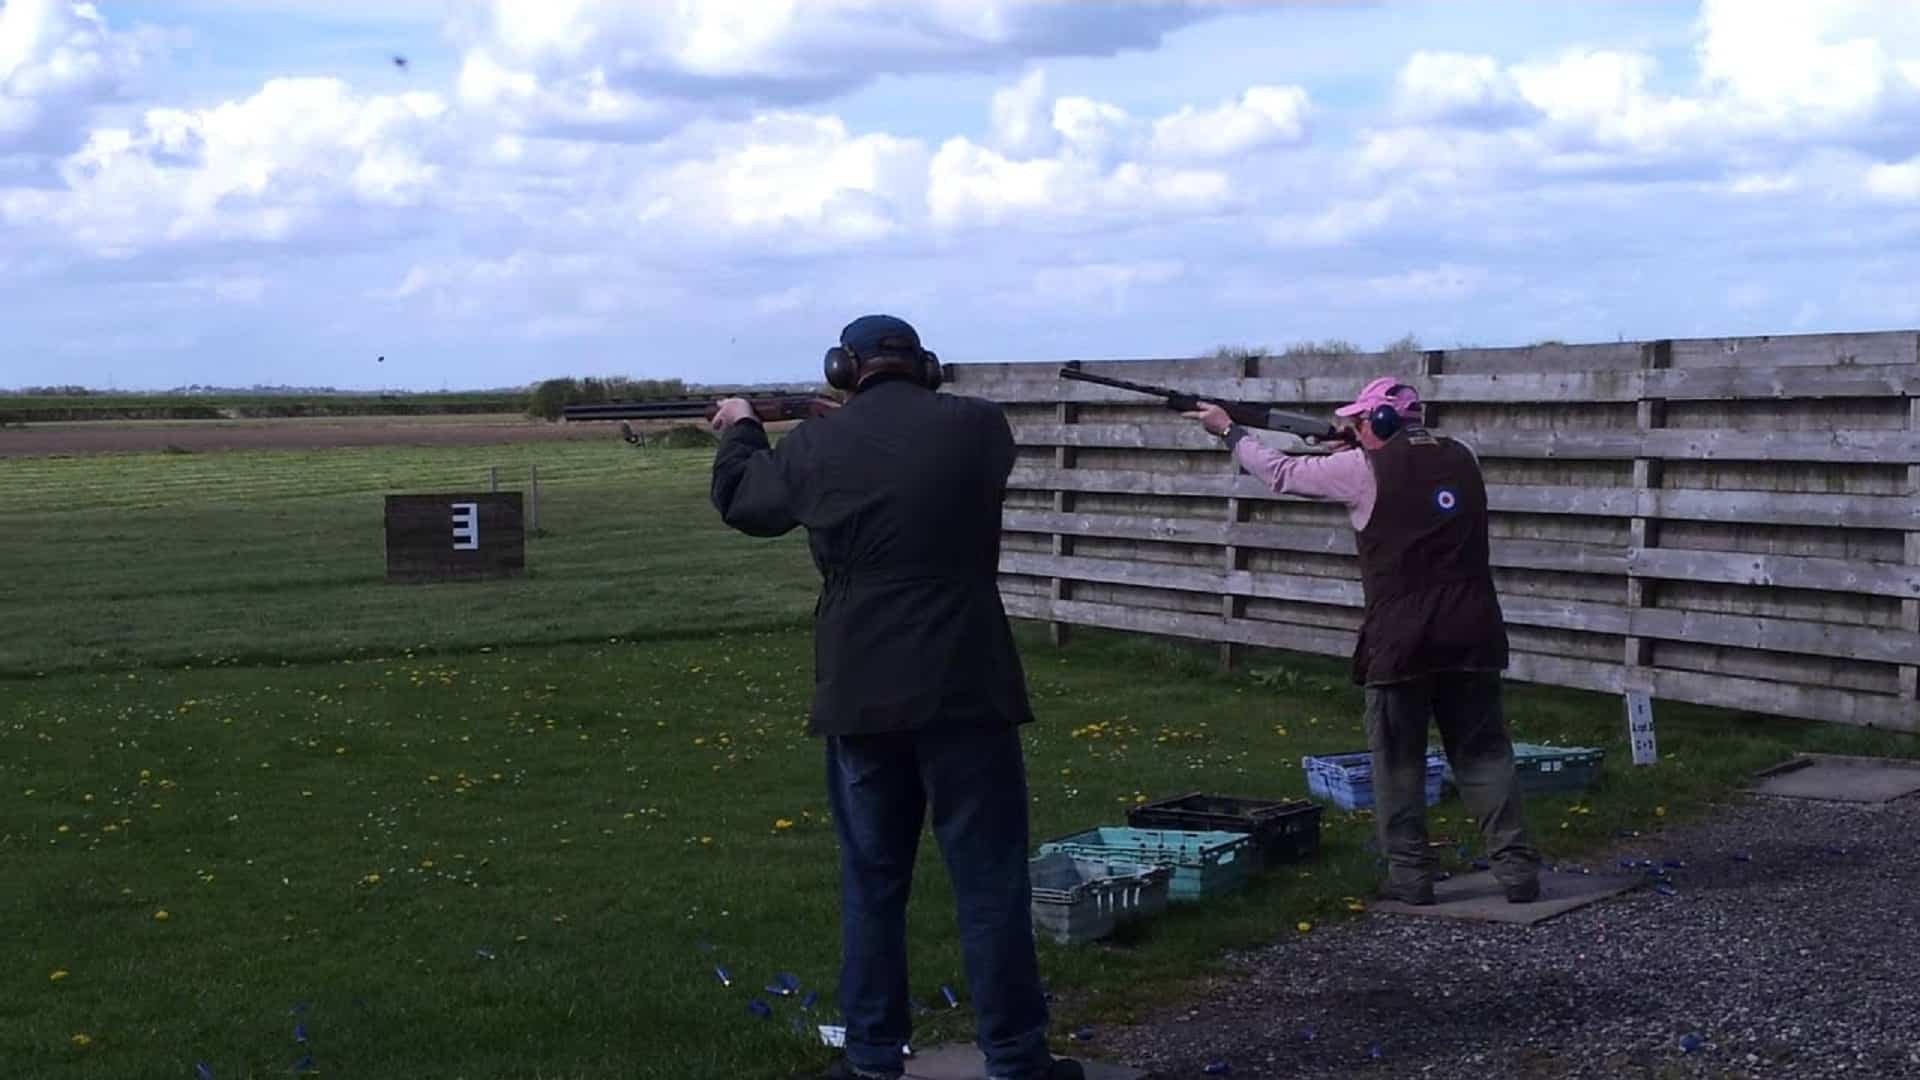 Bowcombe View Shooting Ground in UK